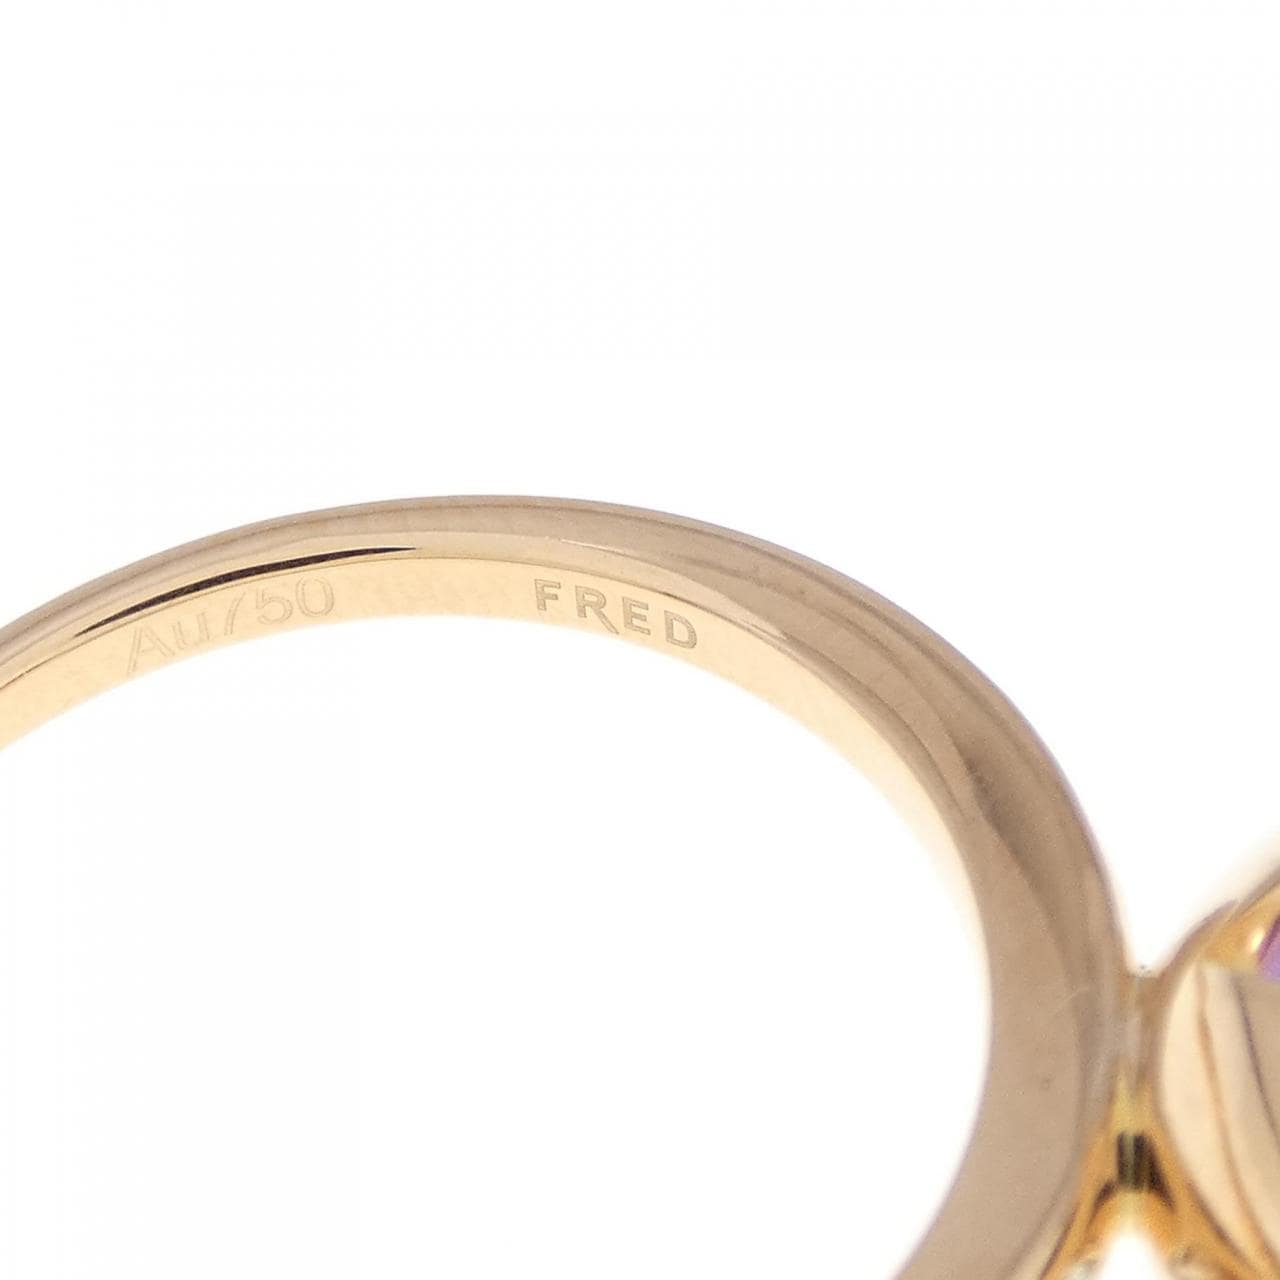 FRED mademoiselle delphine ring